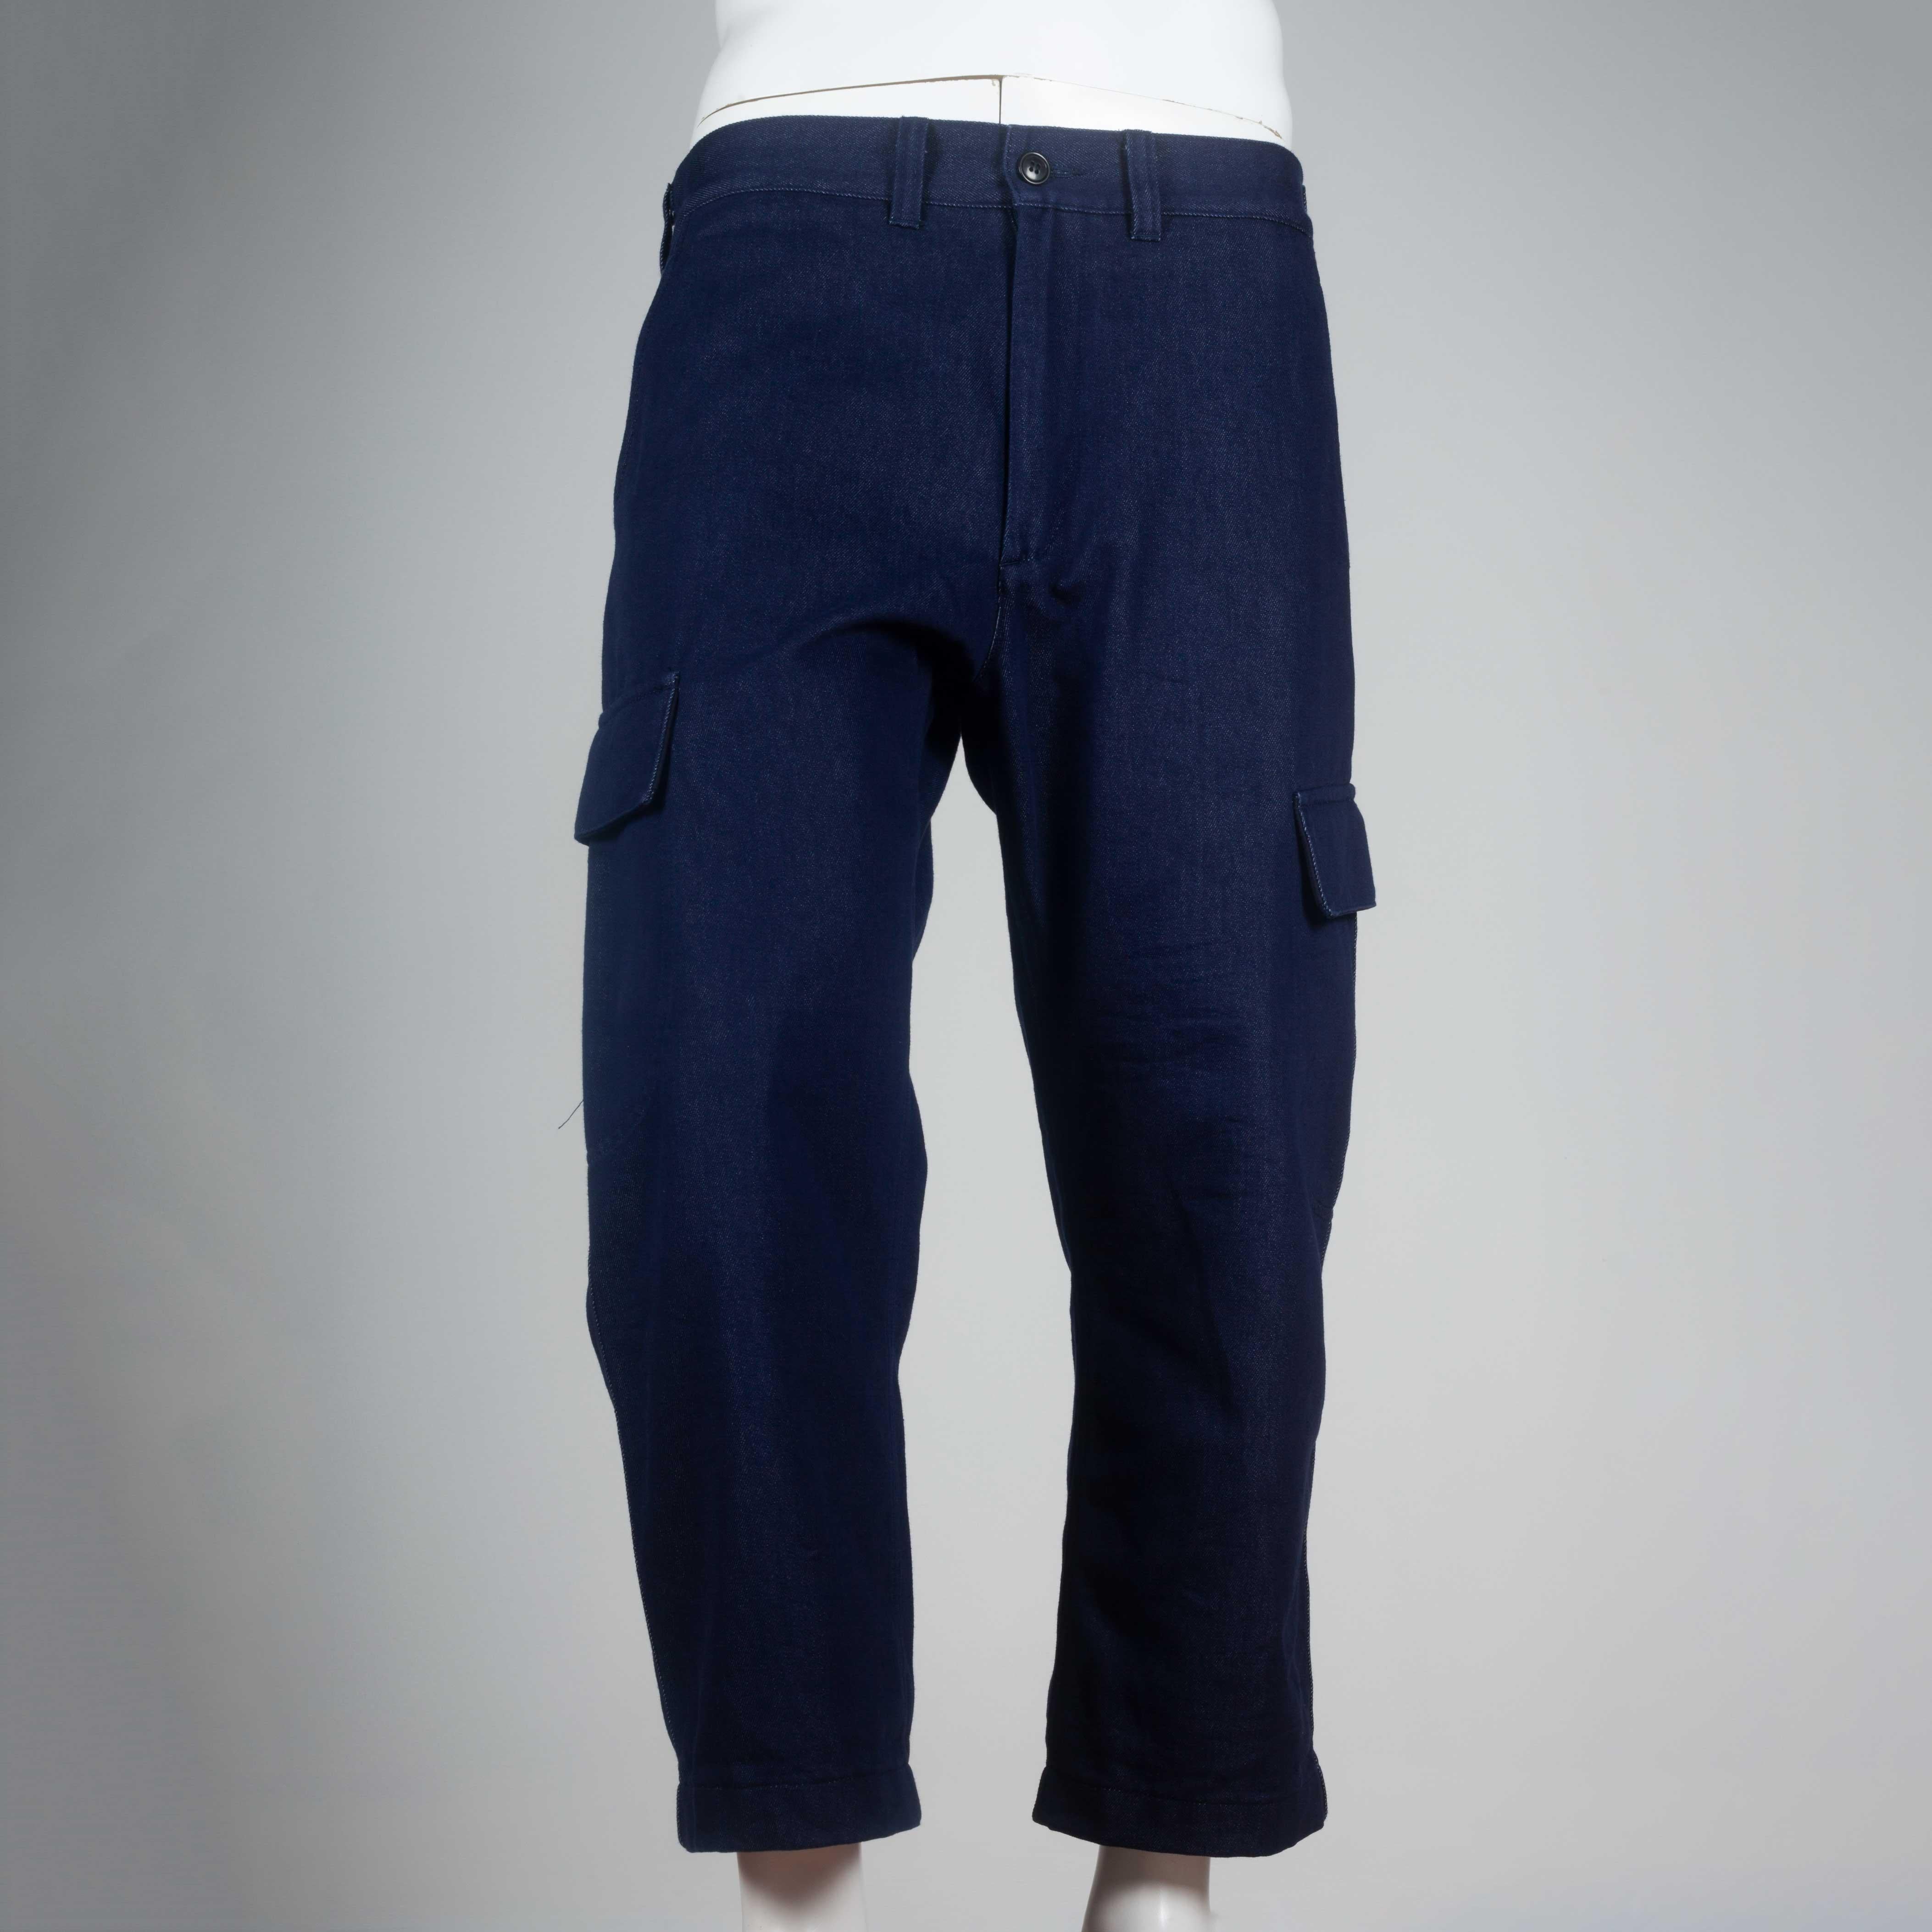 Junya Watanabe Comme des Garçons Man 2016, cargo pants from Japan in deep indigo denim. Minimalist feel to a maximalist function, the simple boxy pockets on each lower thigh complete the design. 

YEAR: 2016
MARKED SIZE: L
US MEN'S: M
US WOMEN'S: